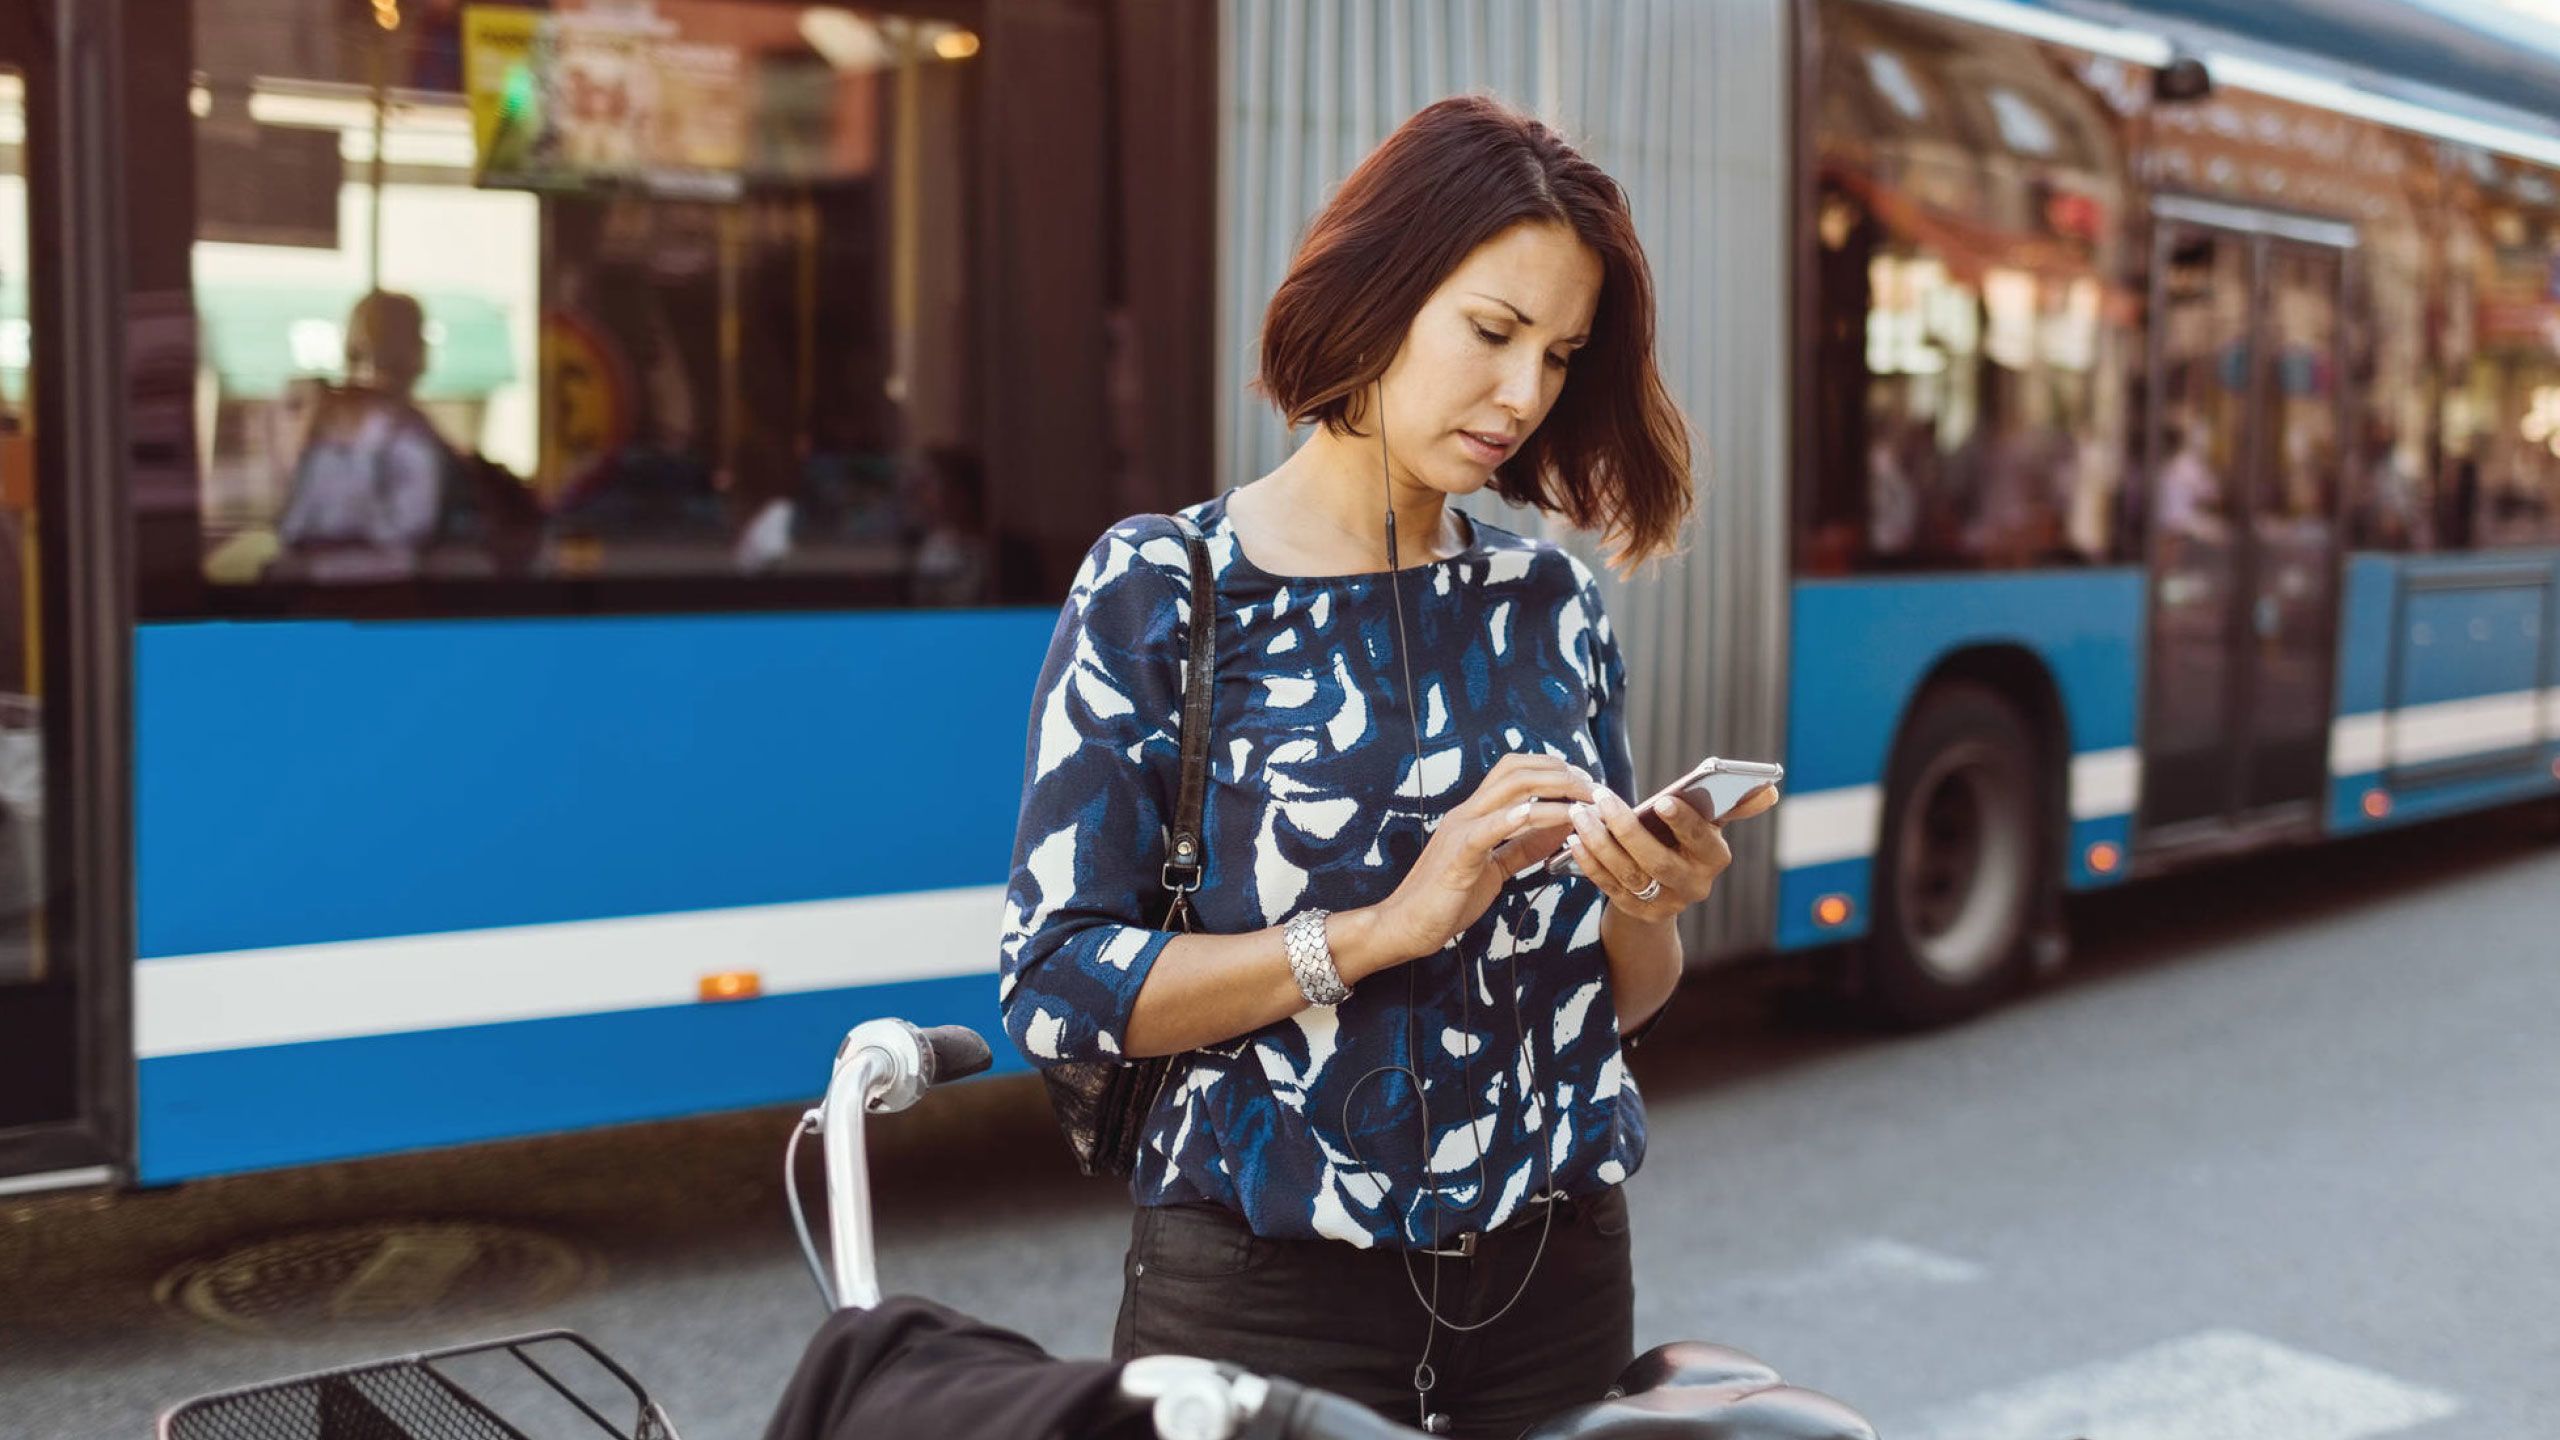 YOUNG WOMAN USING PHONE WHILE SITTING ON STREET